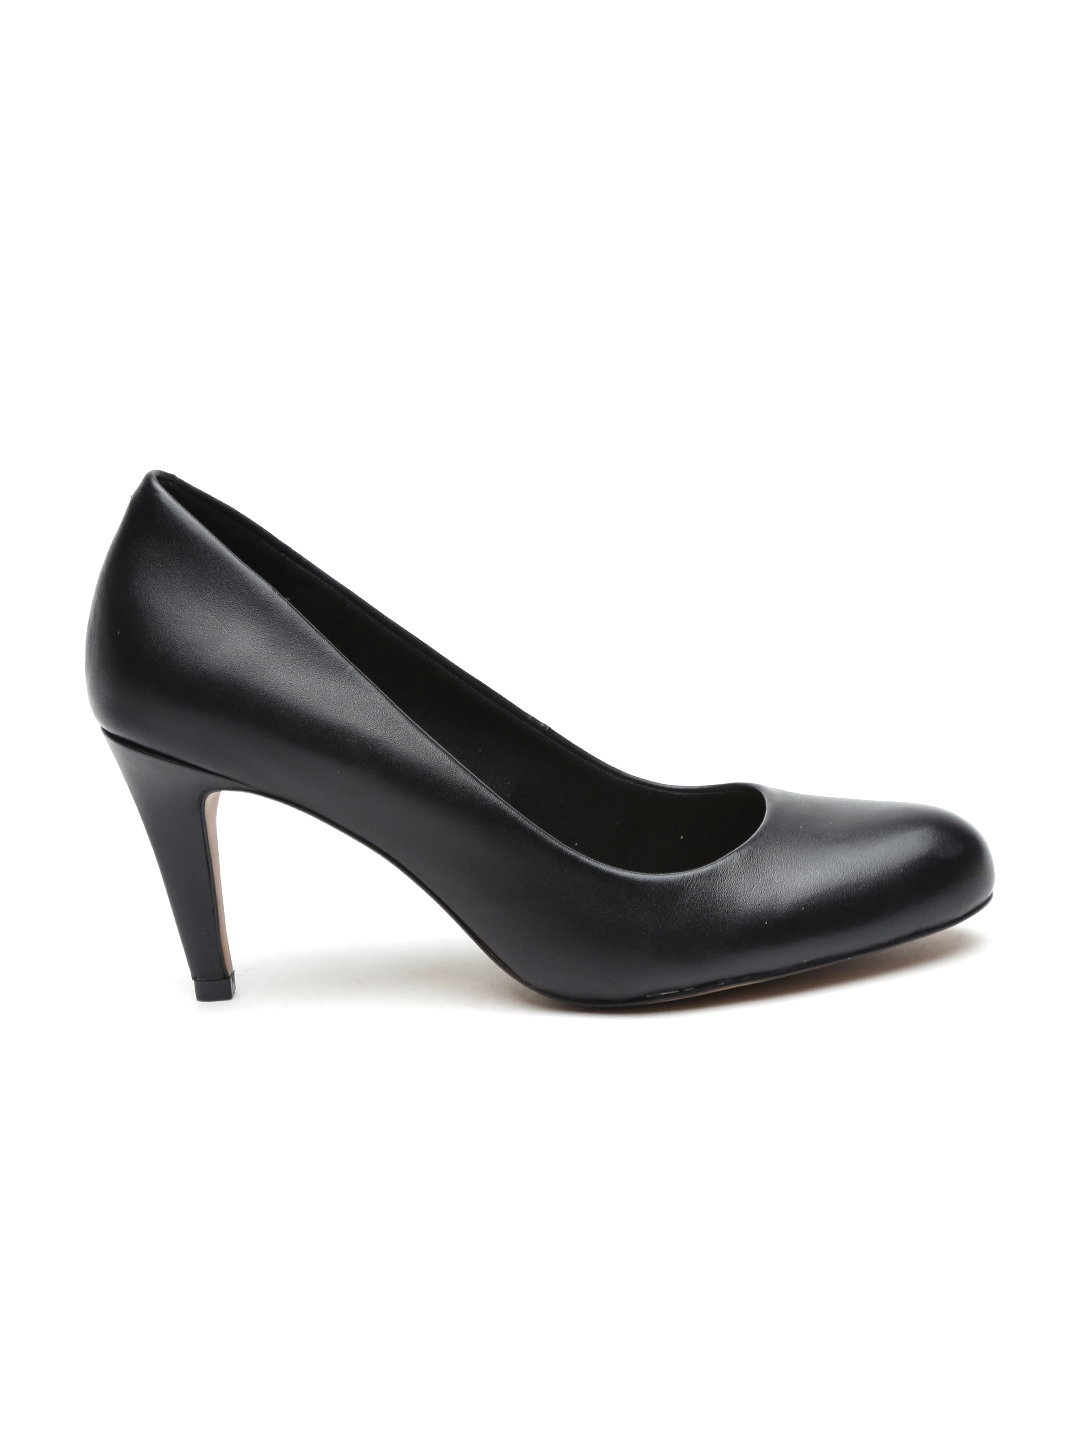 Womens Shoes Heels Pump shoes Clarks Leather Pumps in Black 